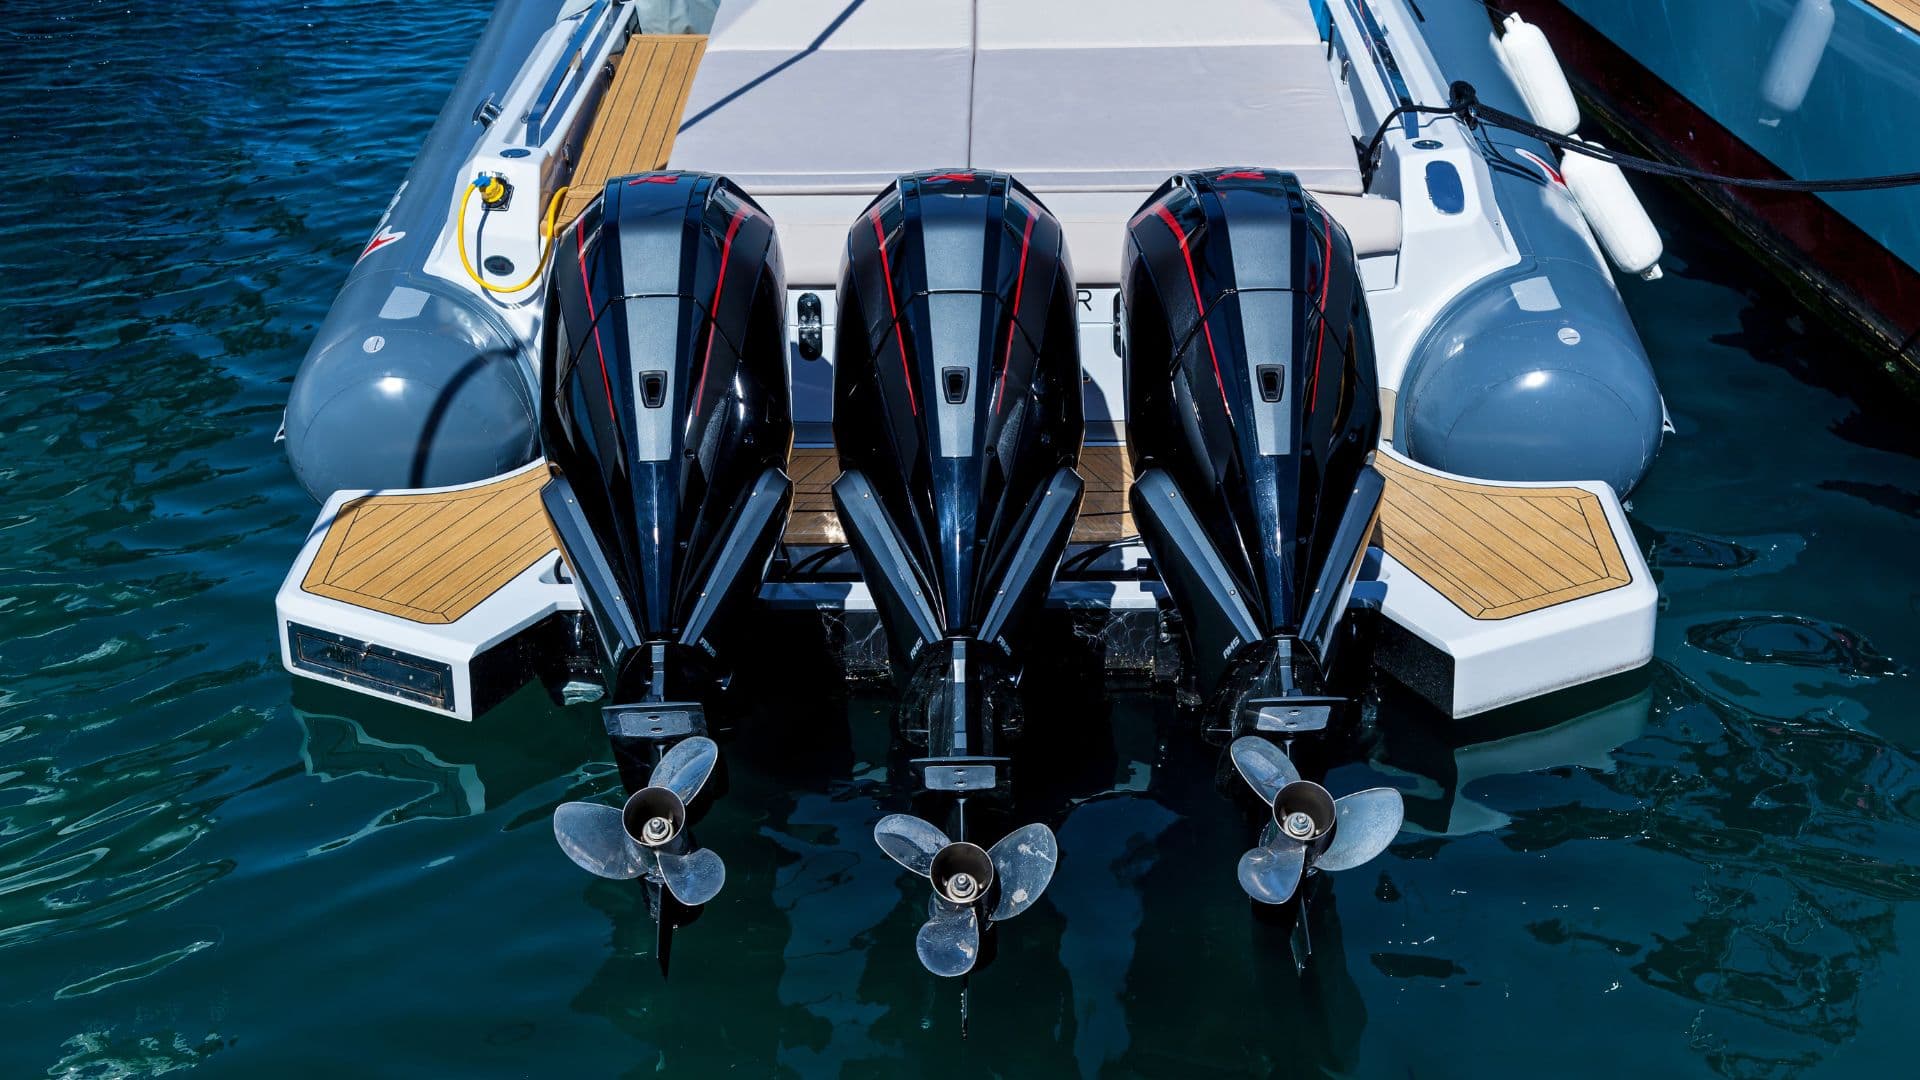 An image of a large center console with outboard engines. 